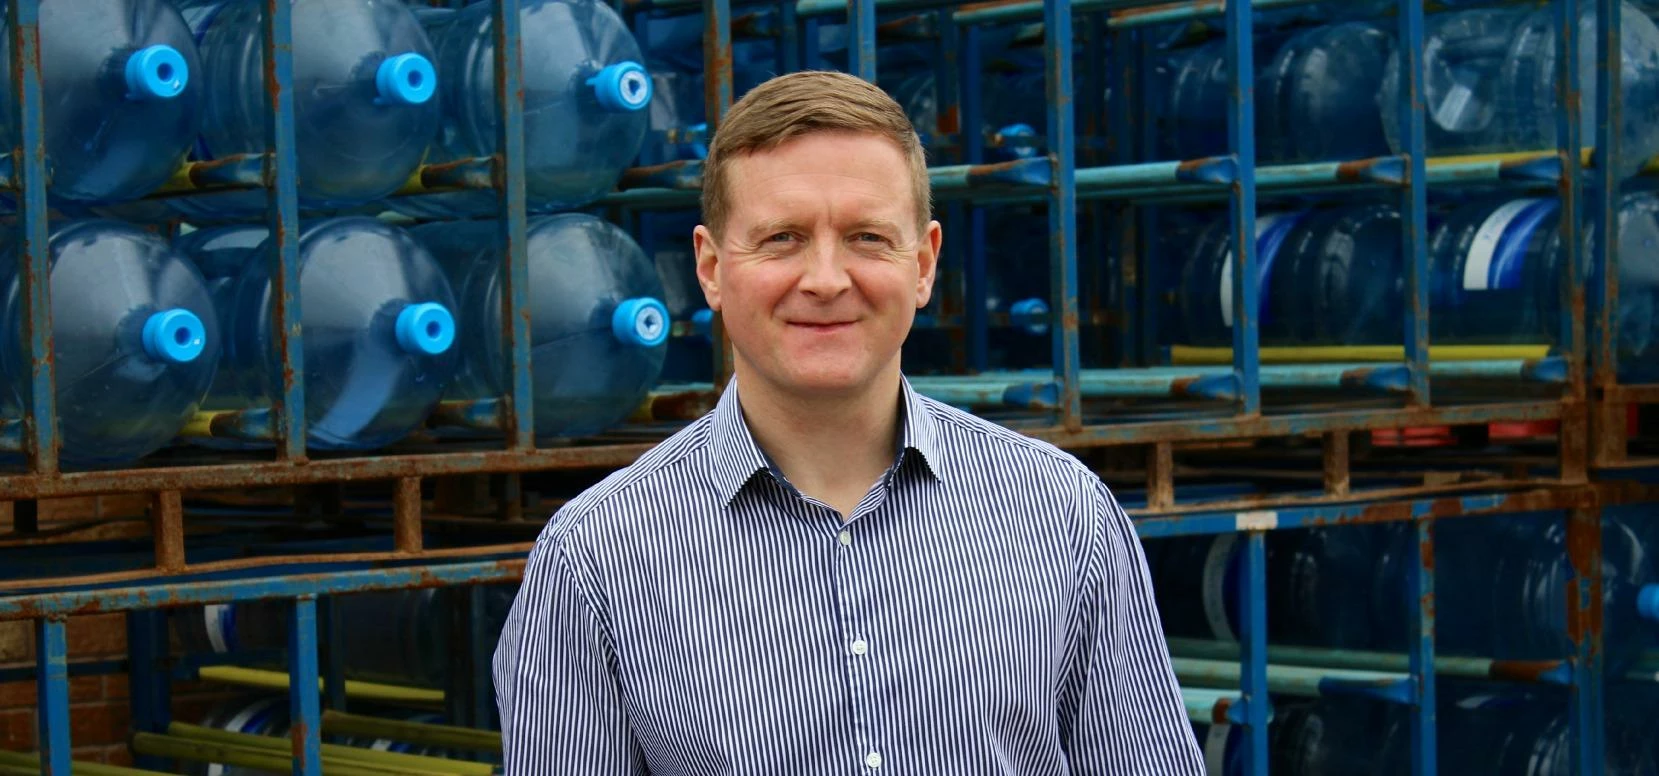 Managing Director of Home 2 Office Water Coolers Steve Wrest